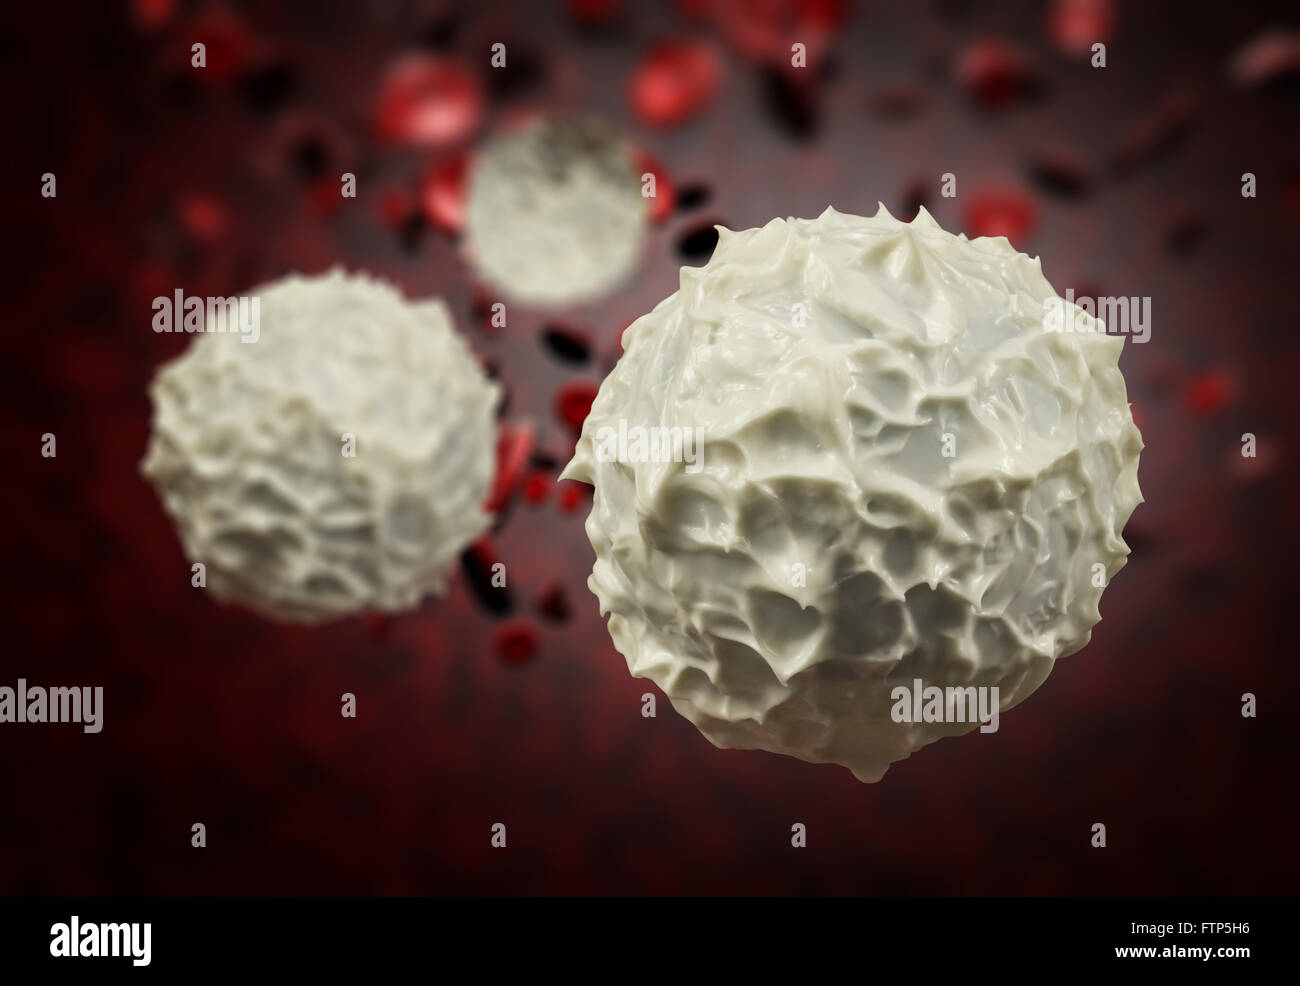 Healthy human red and white bloodcells in close up 3d graphics render Stock Photo